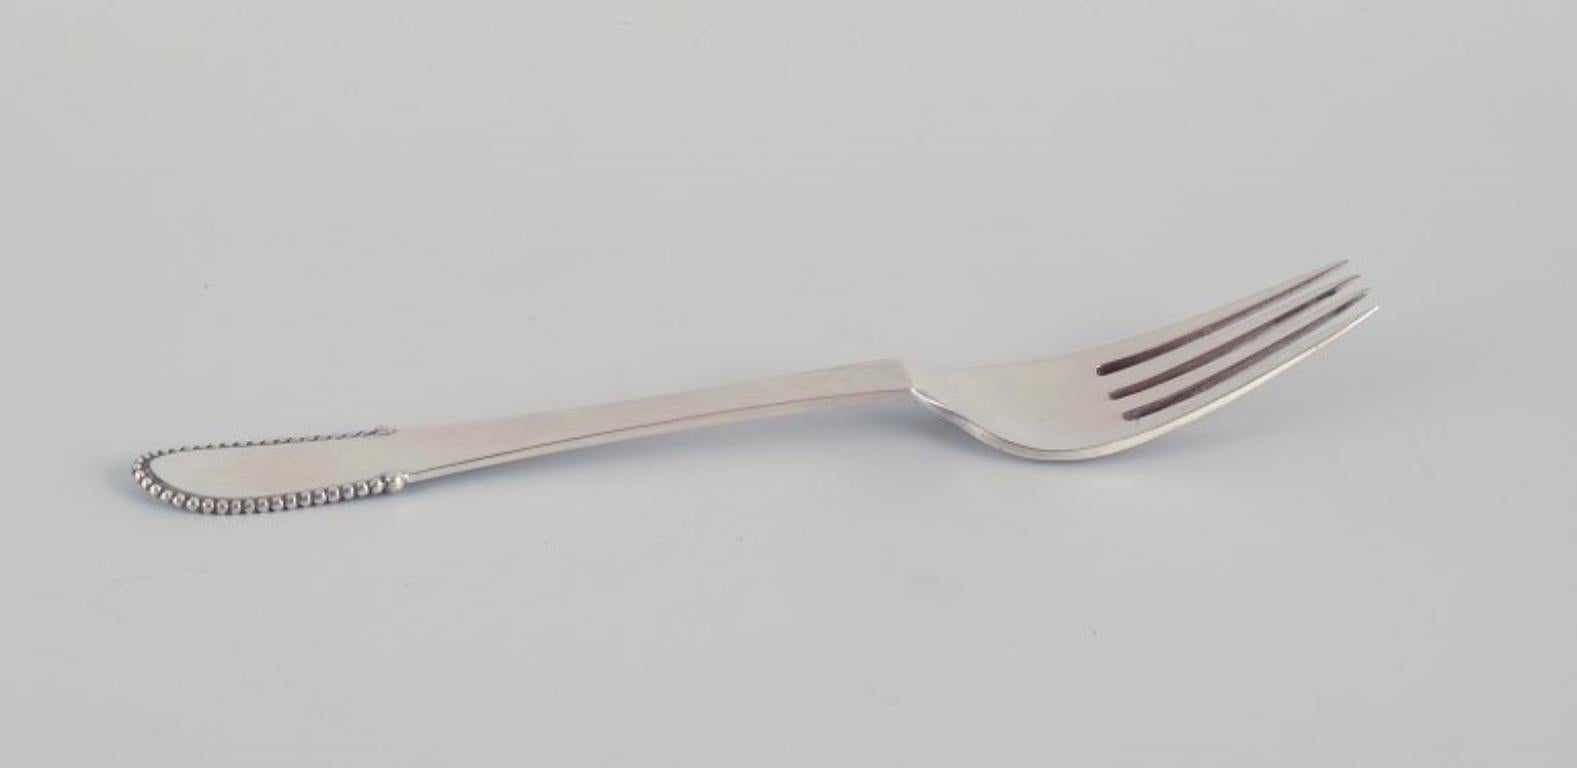 Georg Jensen, a set of six Beaded dinner forks in 830 silver.
Hallmark from 1926-1928.
Perfect condition. As new.
Dimensions: Length 19.4 cm.